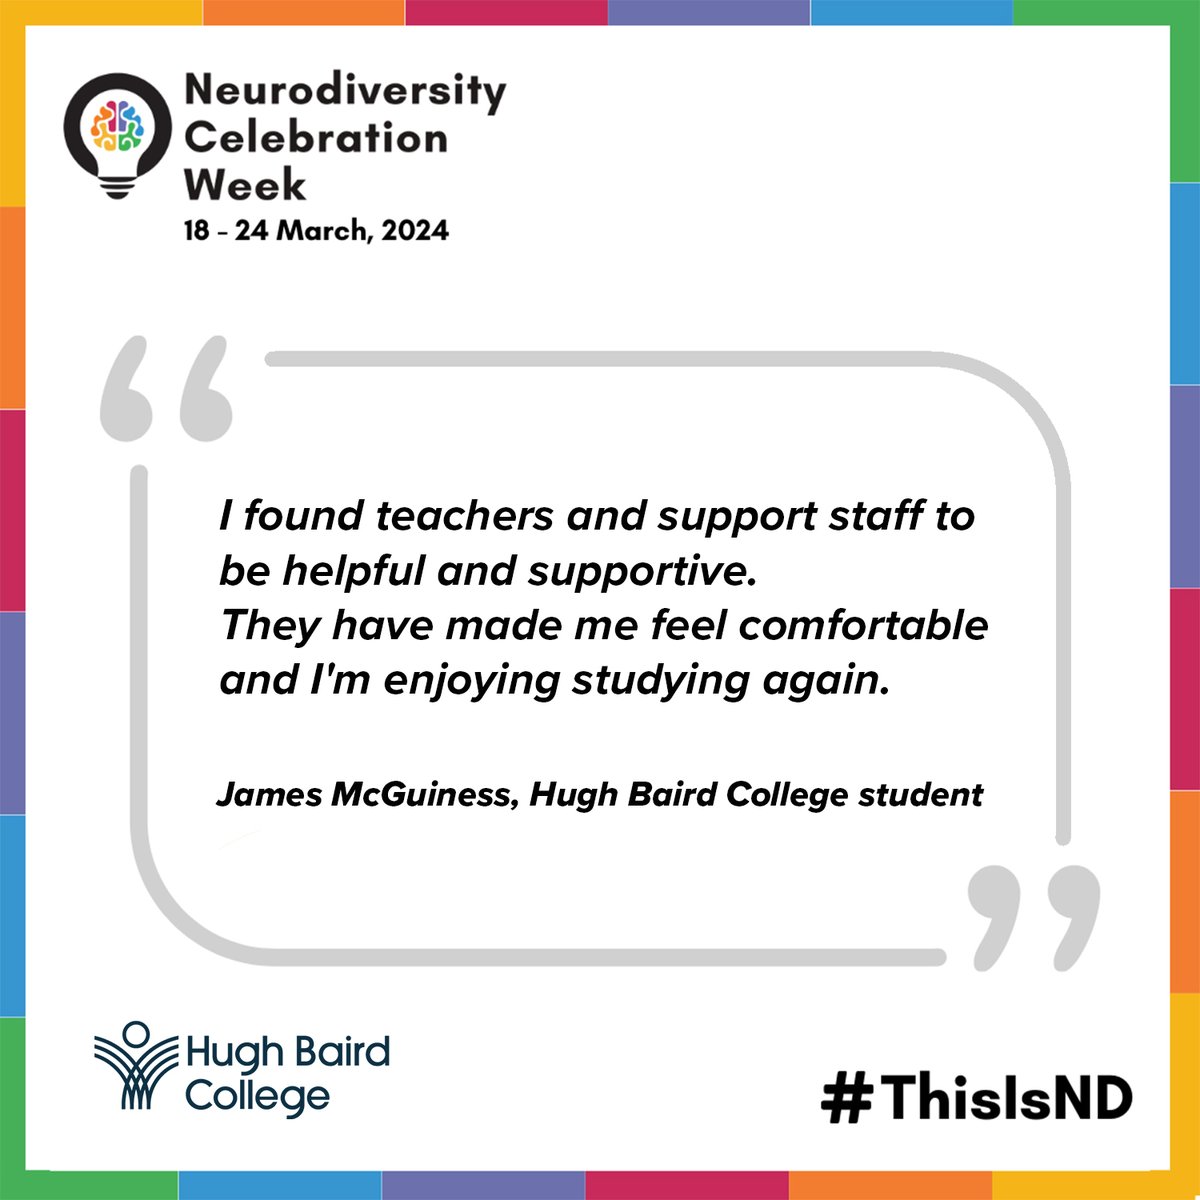 Neurodiversity Week 2024 ⭐

As part of Neurodiversity Week, we spoke with one of our adult students, James. He stated that he enjoys being back in College and working towards his goals with the help of the Learner Support staff.

#neurodiversityweek2024 #NCW #thisisND